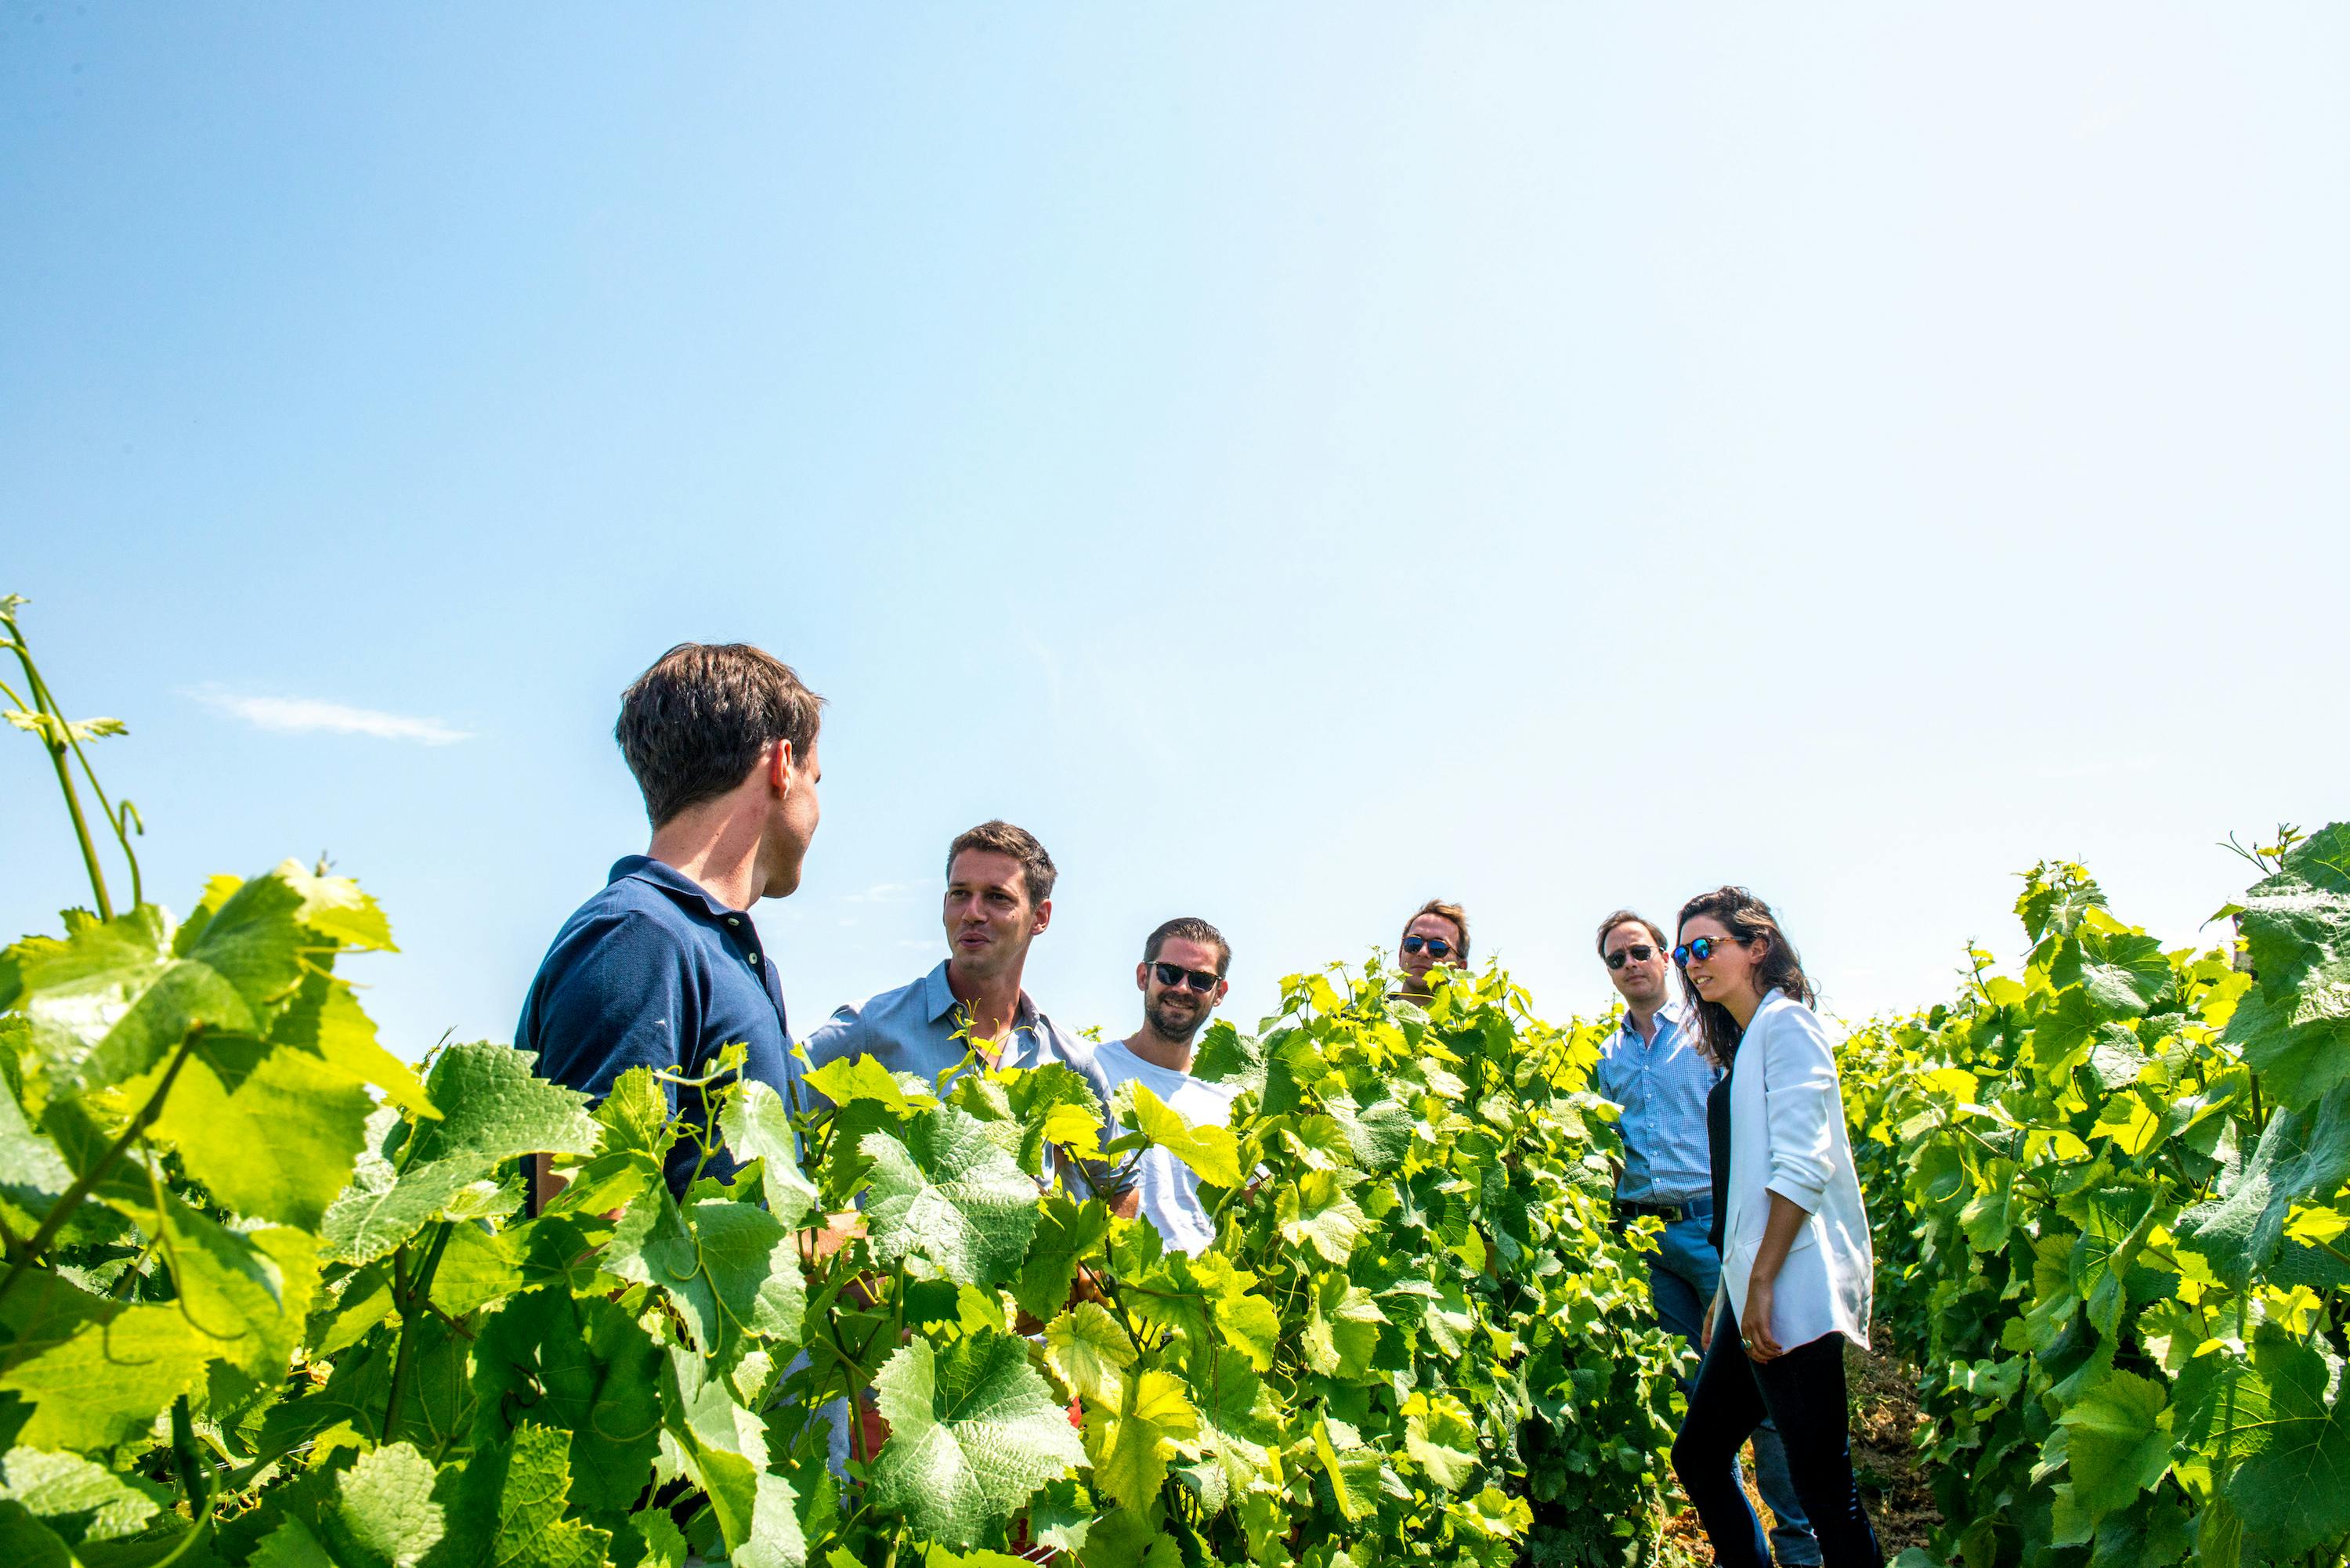 Short day family grower tour and lunch from Epernay